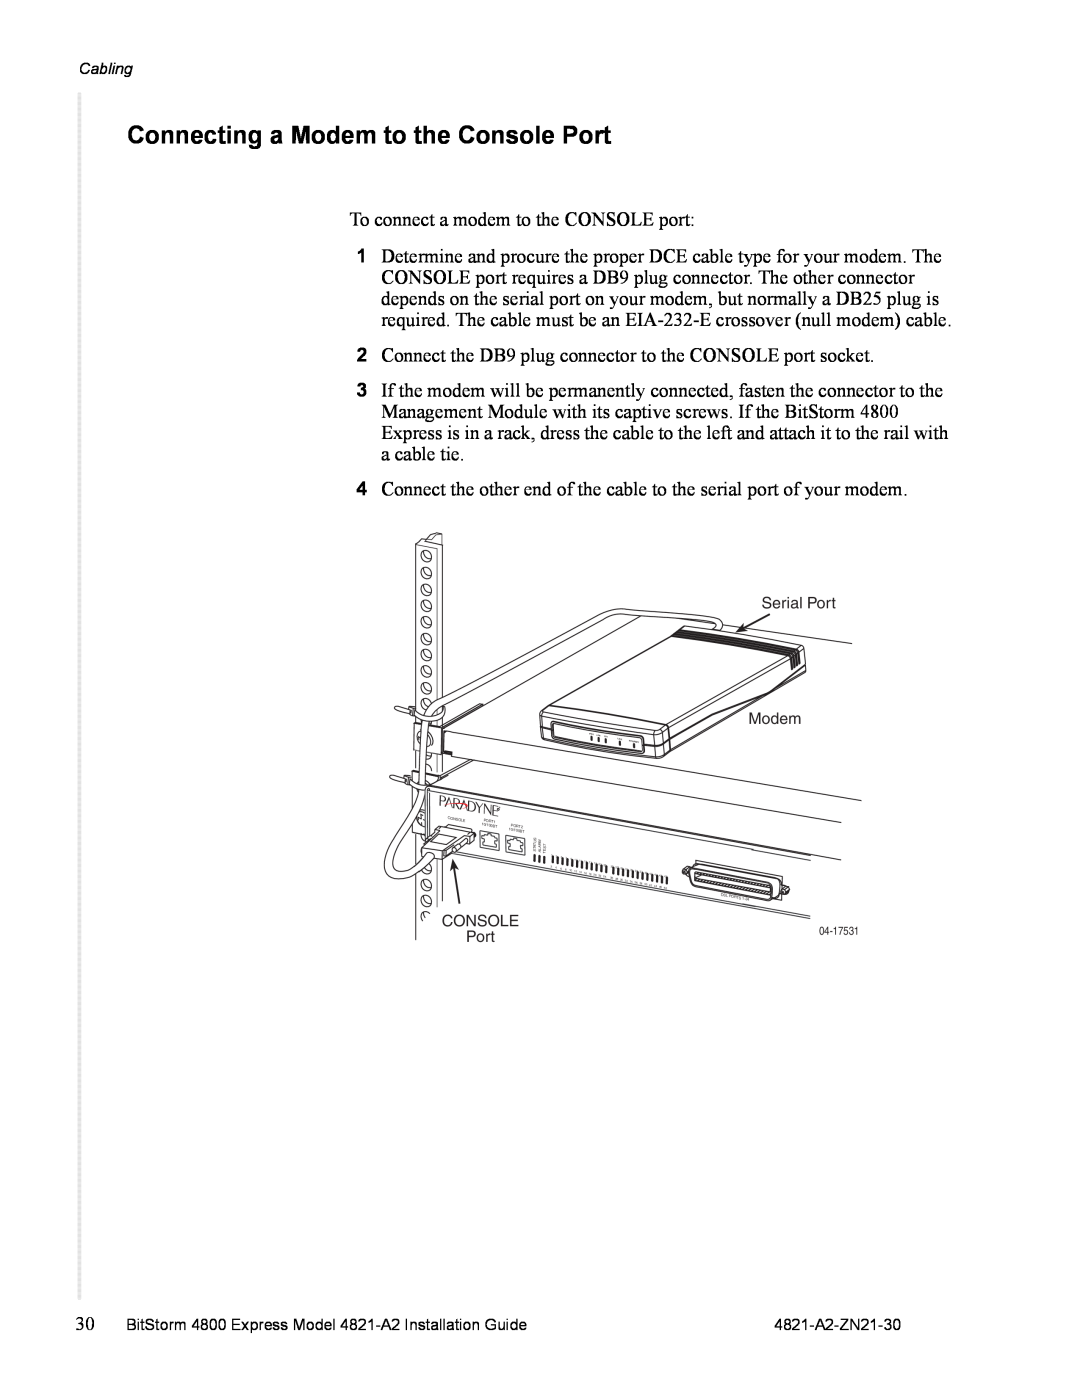 Zhone Technologies 4821-A2 manual Connecting a Modem to the Console Port 